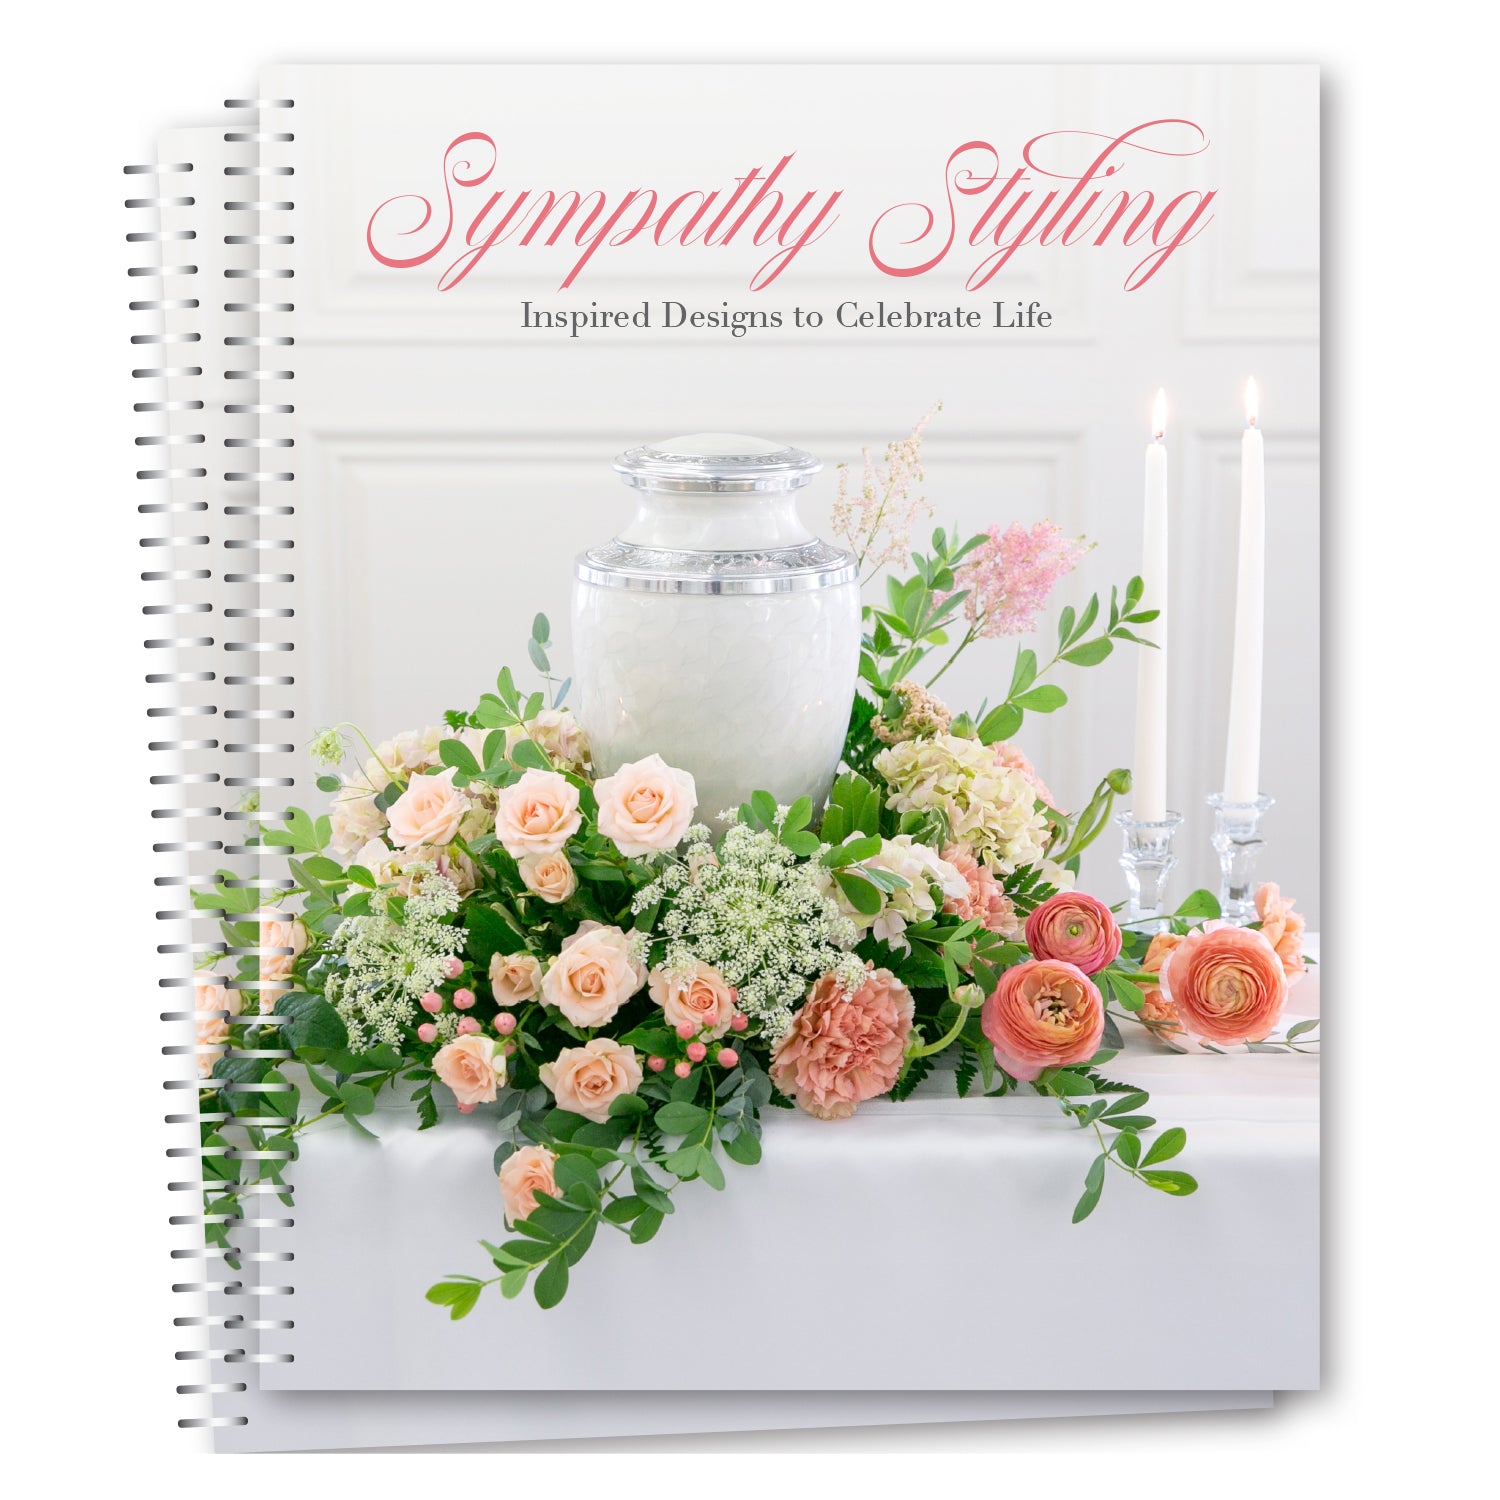 Back cover of the sympathy styling book